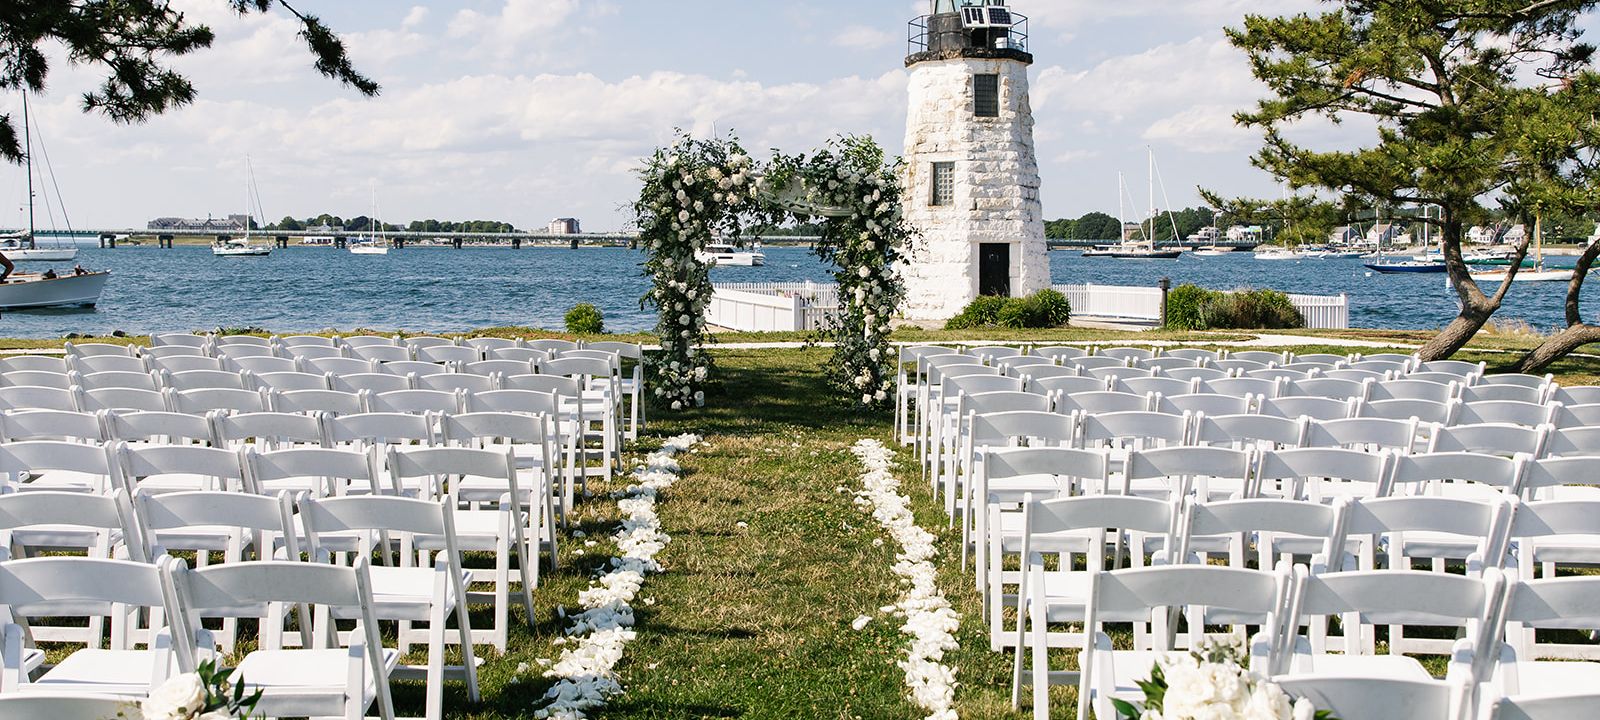 Outdoor seating for a seaside wedding near a lighthouse.